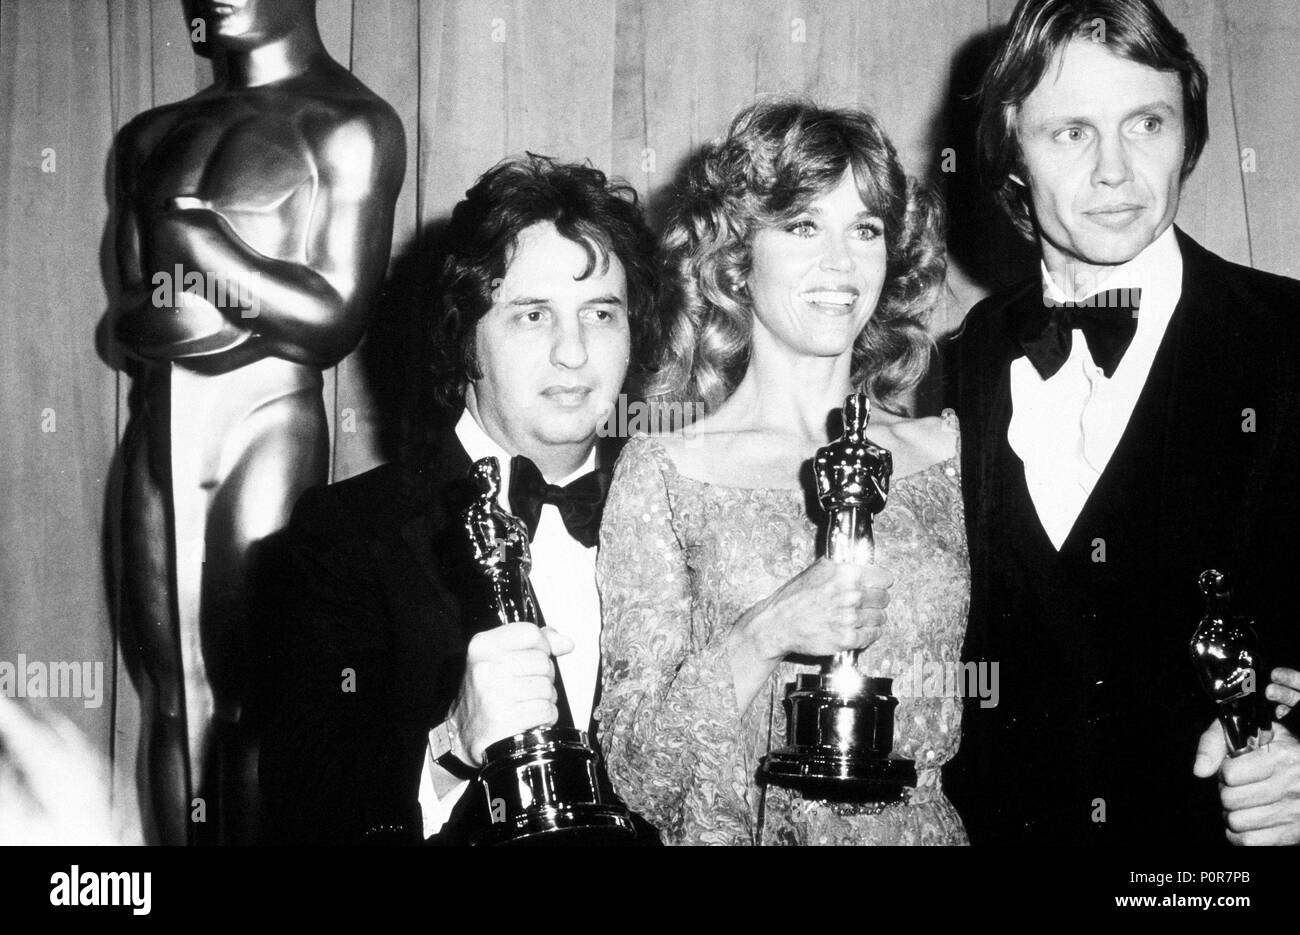 Description: The 51st Academy Awards / 1979.   Michale Cimino, best director for 'The Hunter'. John Voight, best actor for 'Coming Home'. Jane Fonda, best actress for 'Coming Home'..  Year: 1979.  Stars: JANE FONDA; JON VOIGHT; MICHAEL CIMINO. Stock Photo